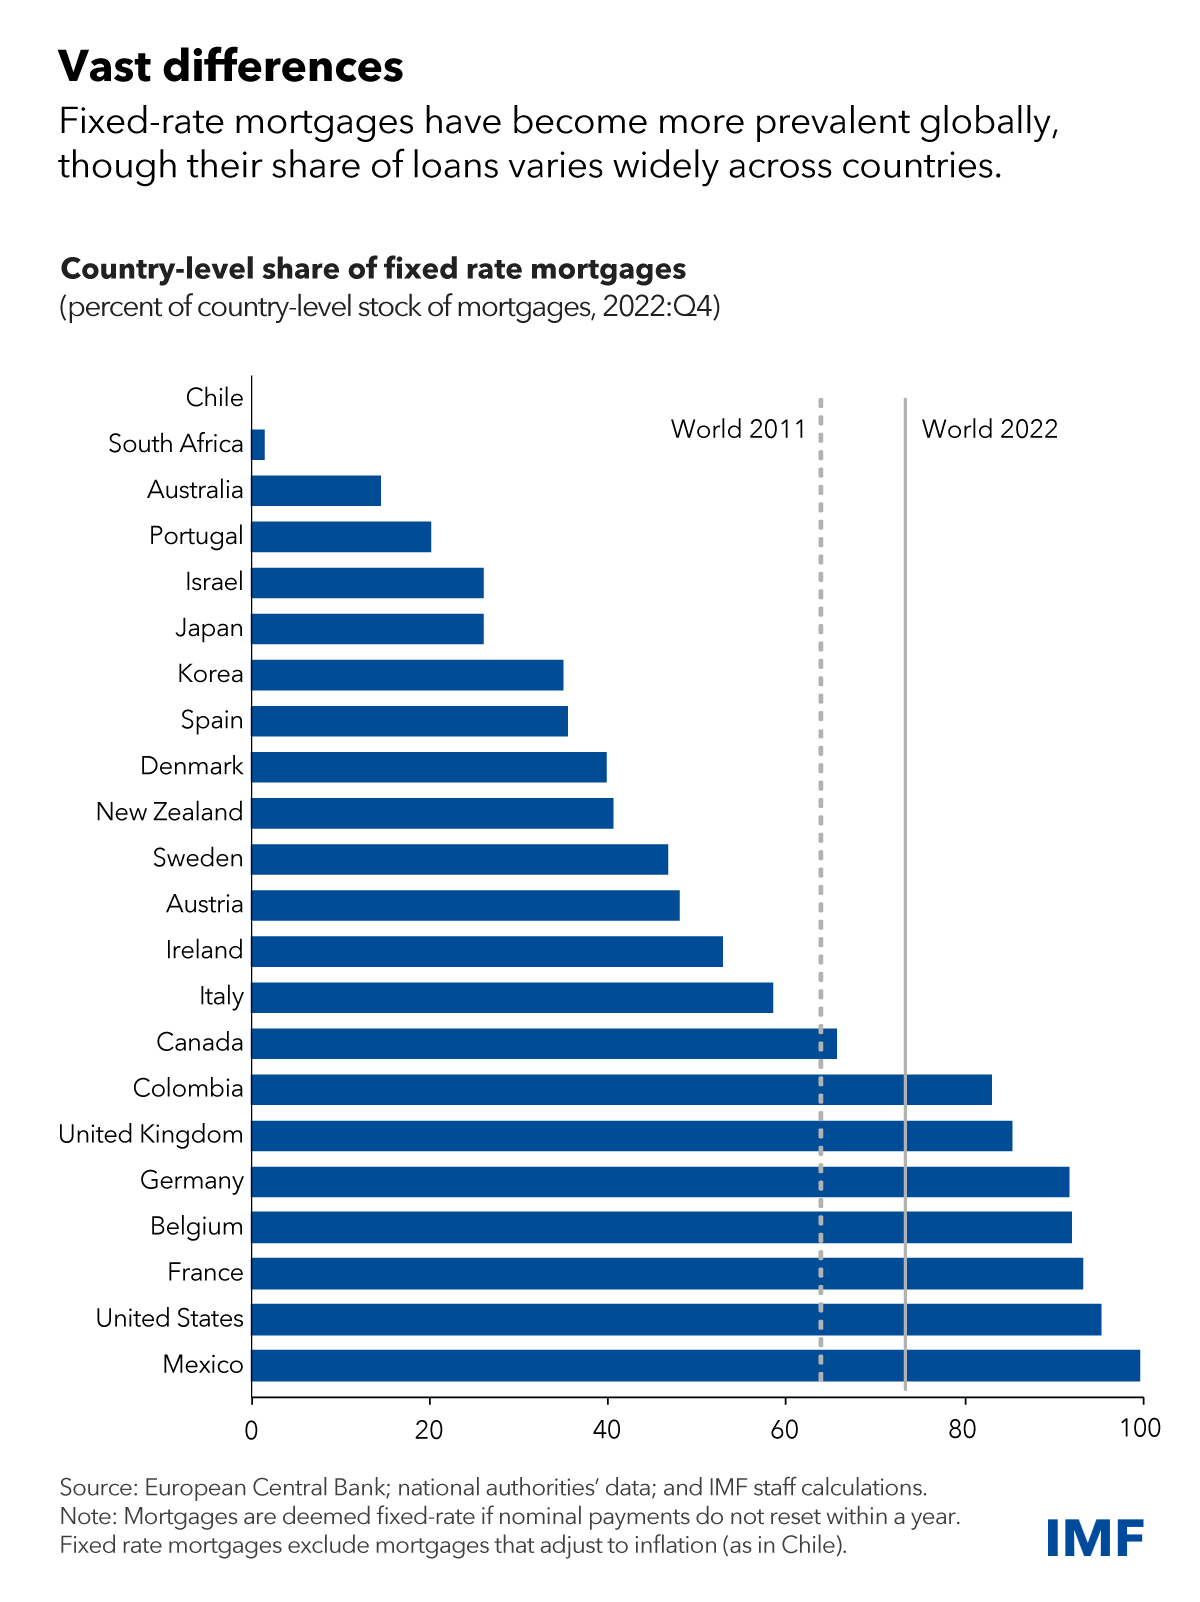 Country-level share of fixed rate mortgages